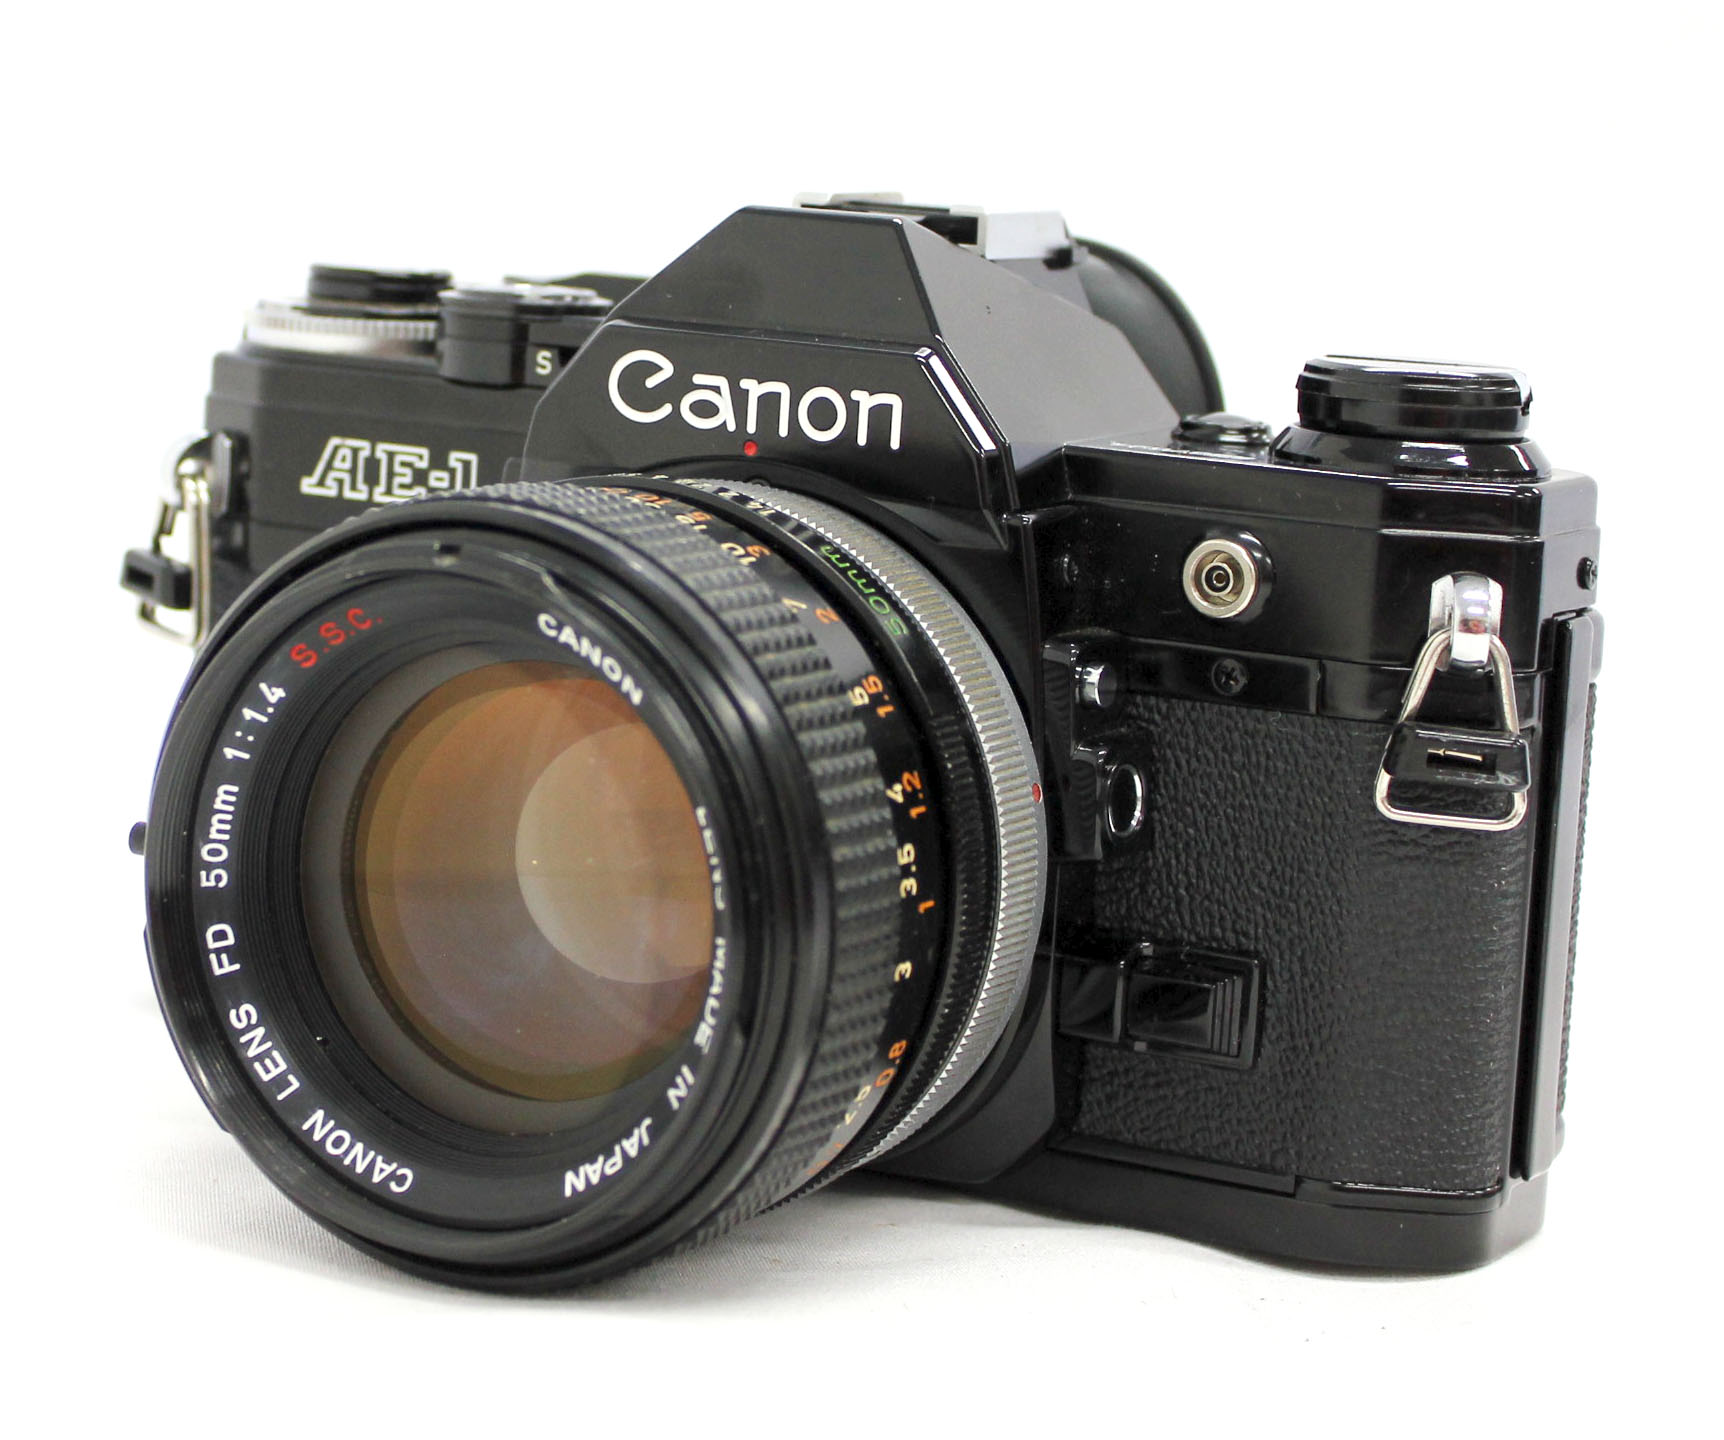 Japan Used Camera Shop | Canon AE-1 35mm SLR Camera Black with FD 50mm F/1.4 S.S.C. Lens from Japan